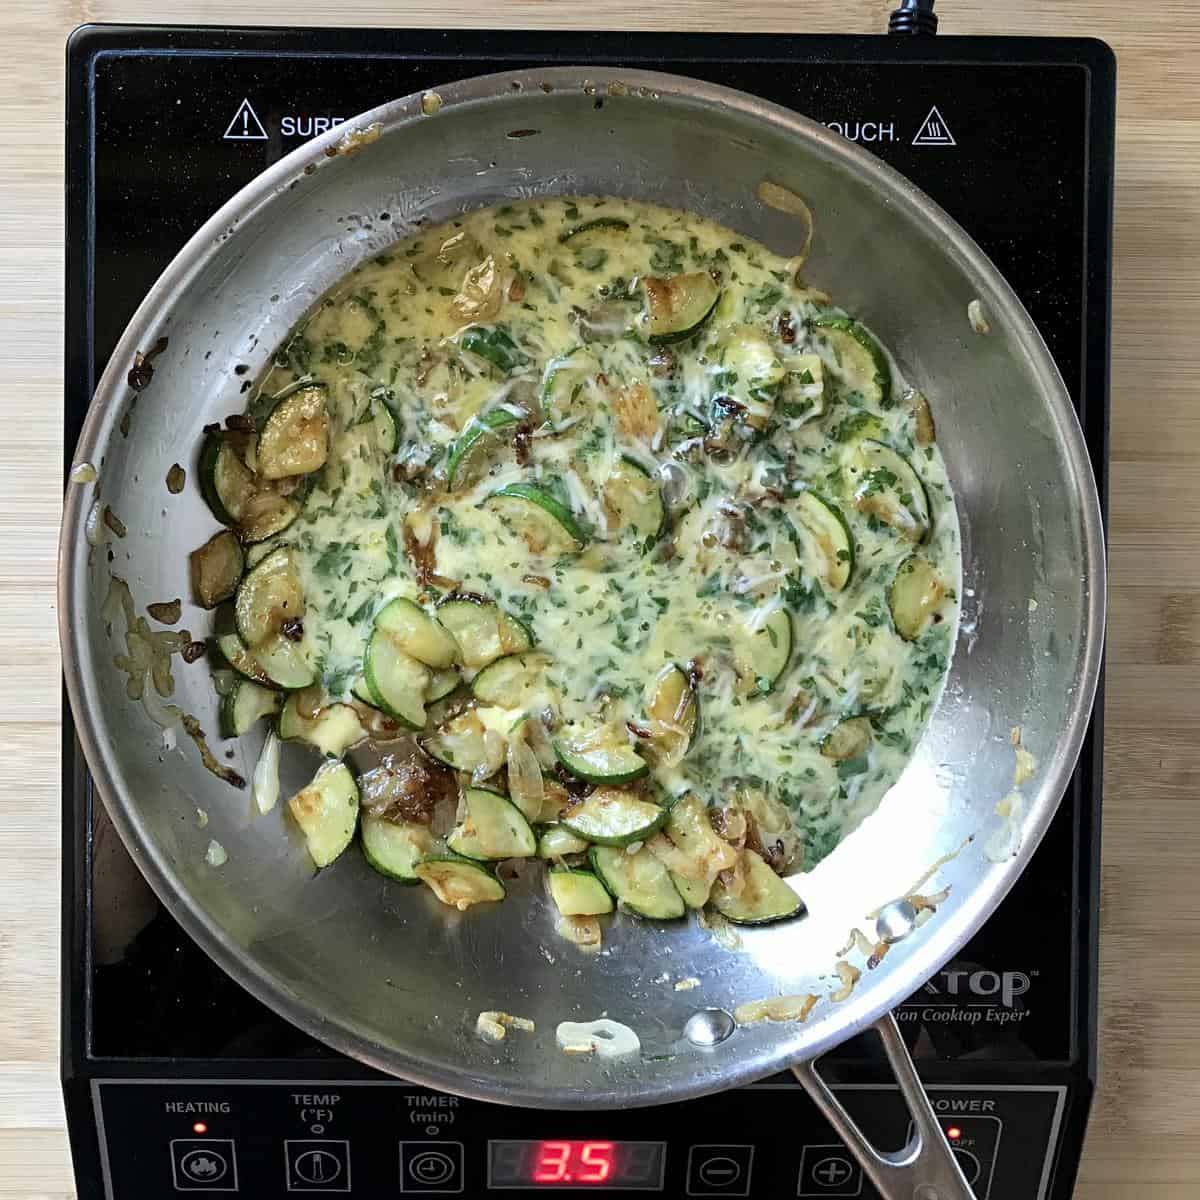 Whisked eggs sauteed with zucchini and onions.